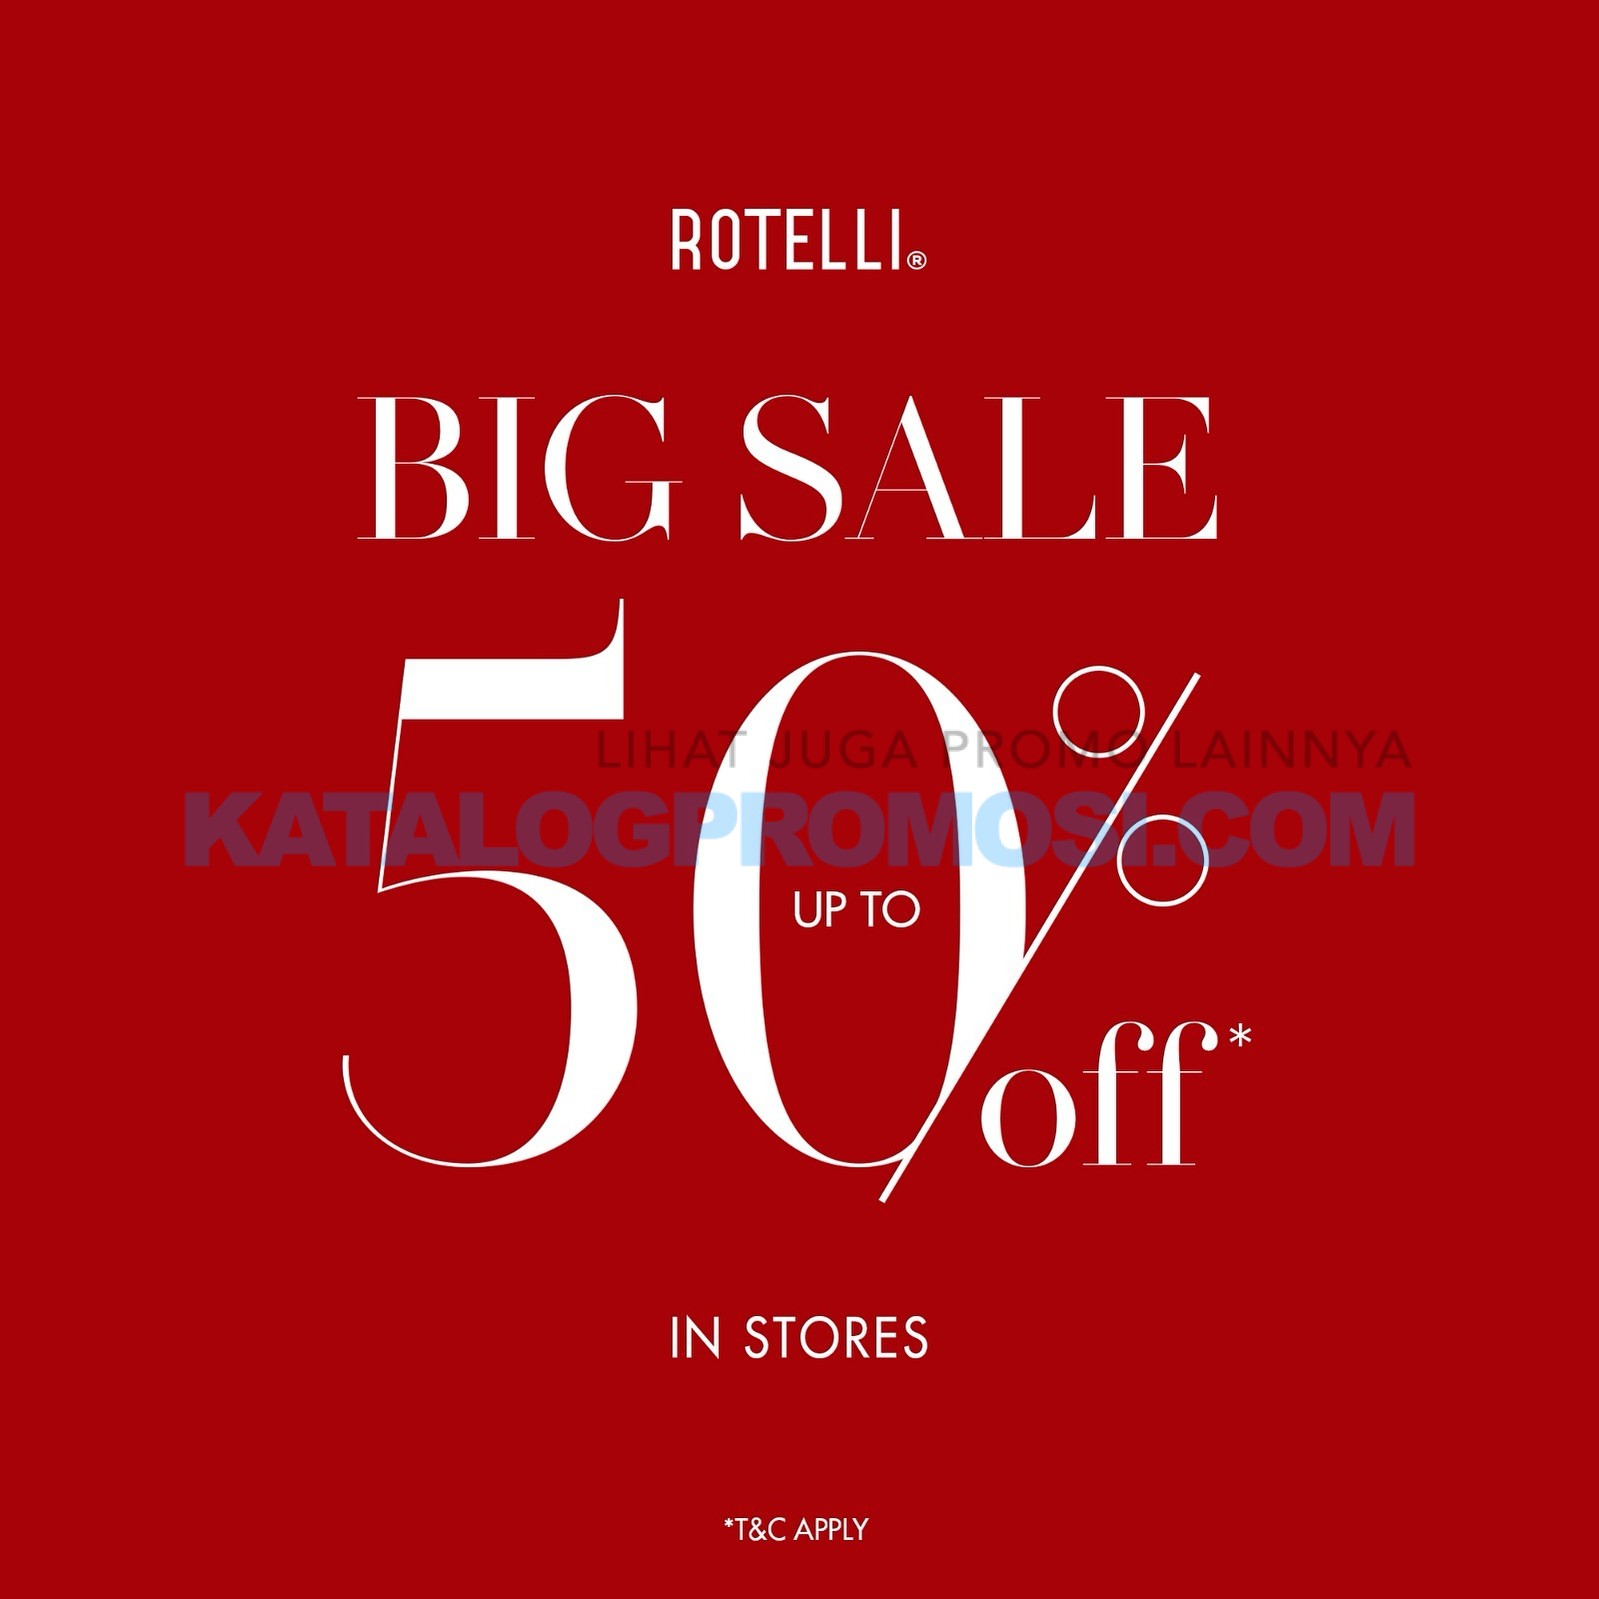 Promo ROTELLI BIG SALE - SPECIAL DISCOUNT up to 50% off